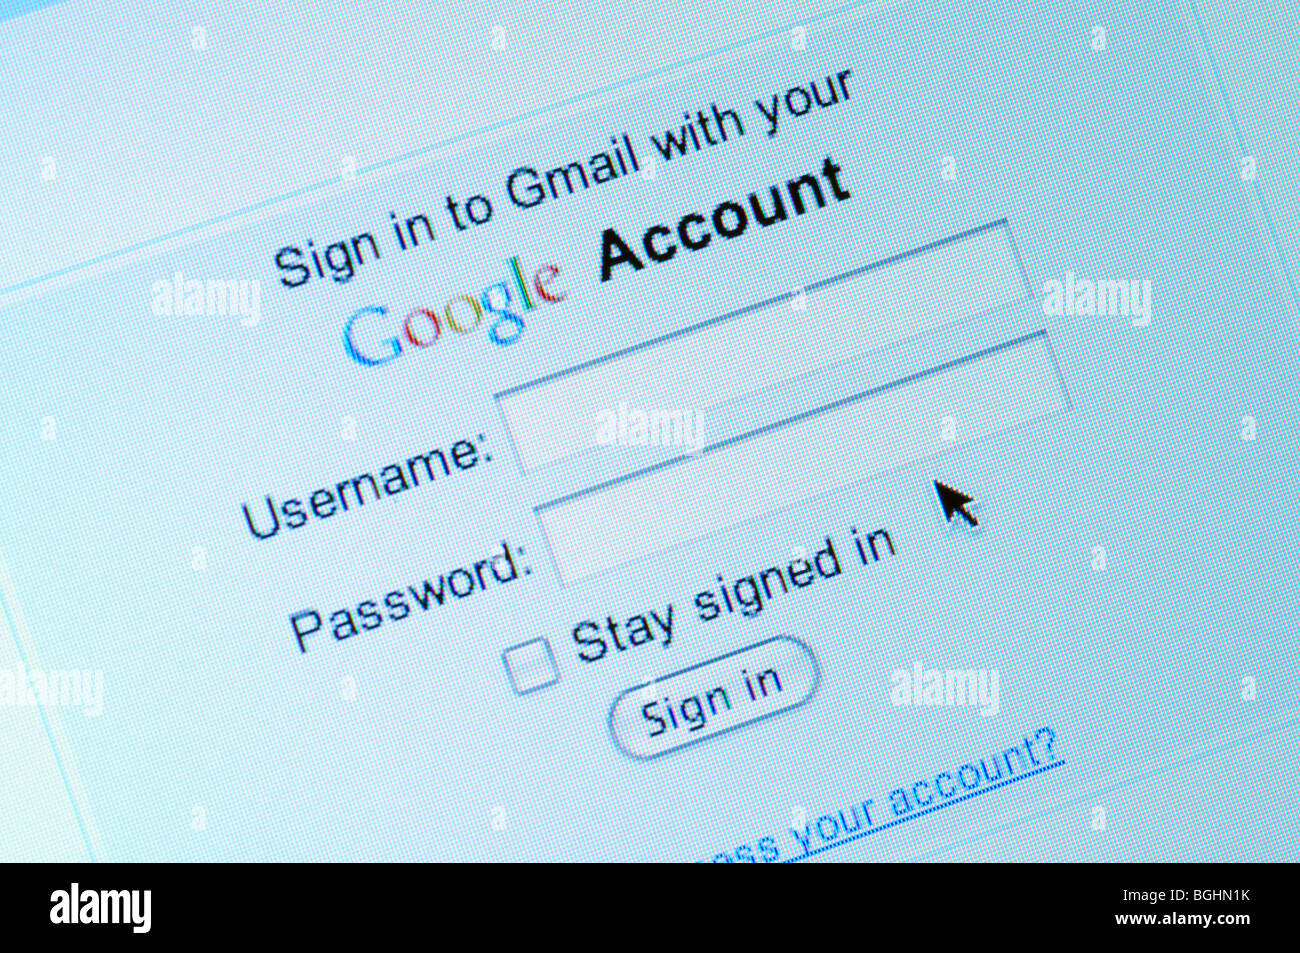 Page gmail login Sign in